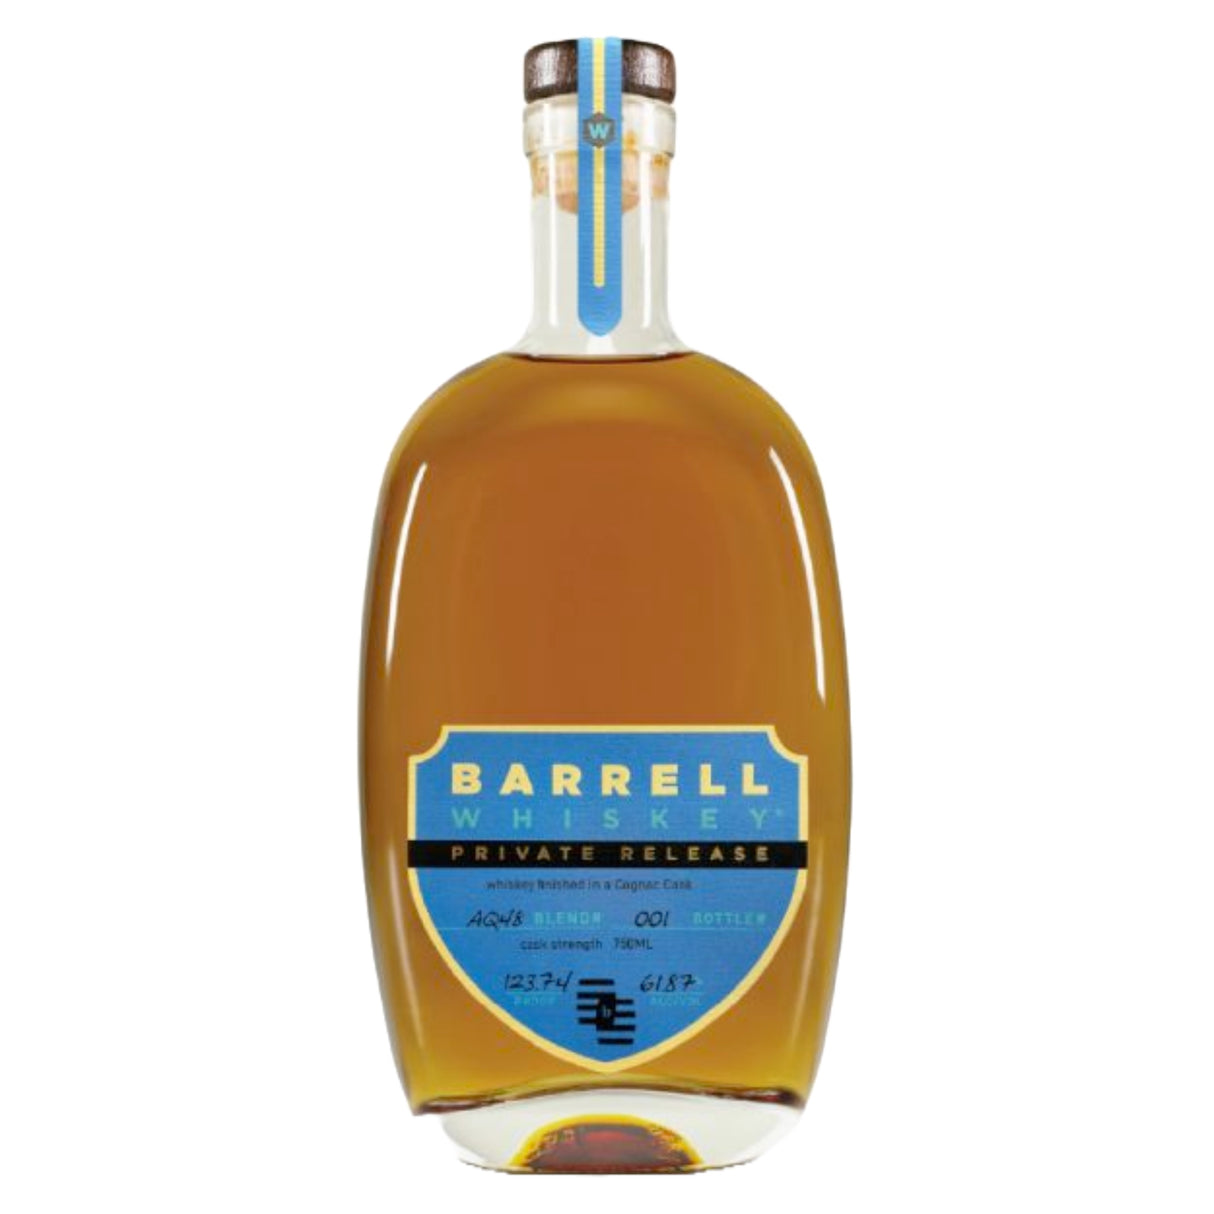 Barrell Craft Spirits Private Release Kentucky Whiskey Finished in Cognac Cask AQ48